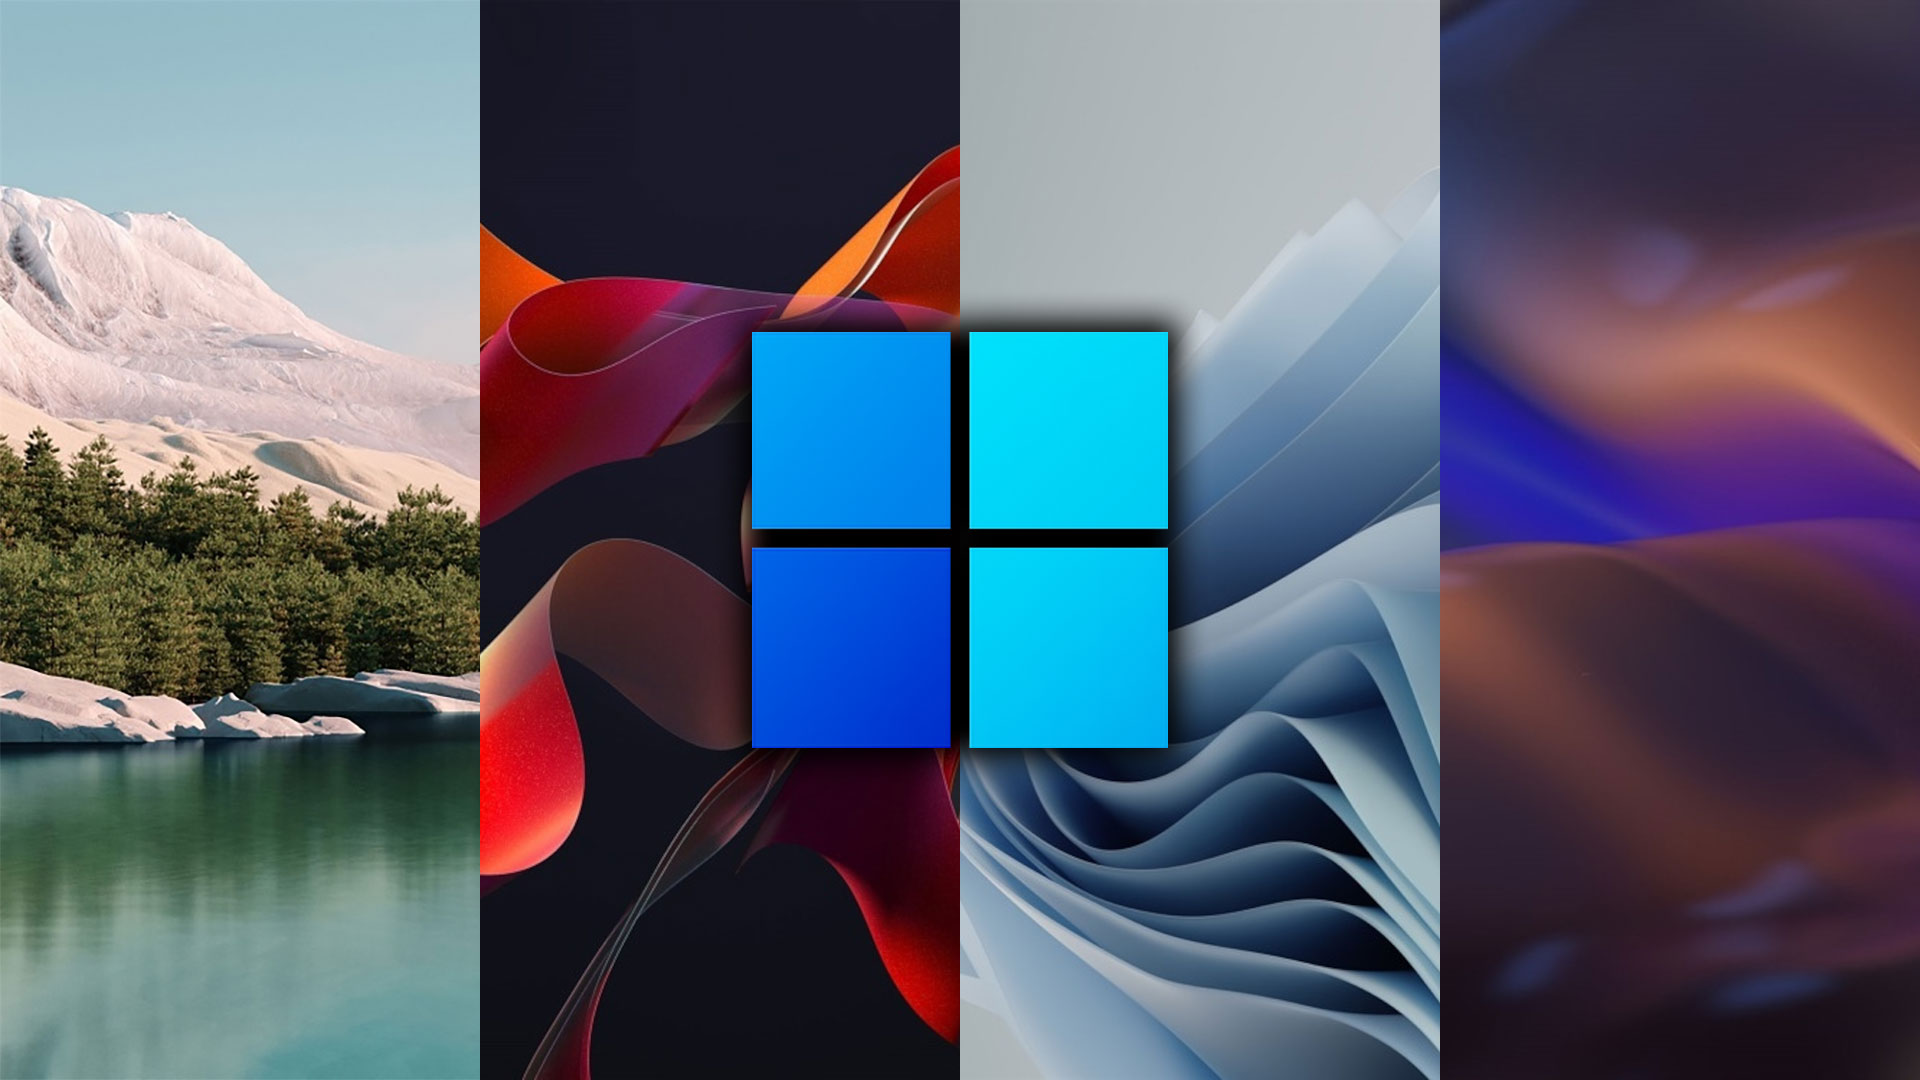 Windows 11: download the official wallpapers | Download - GizChina.it